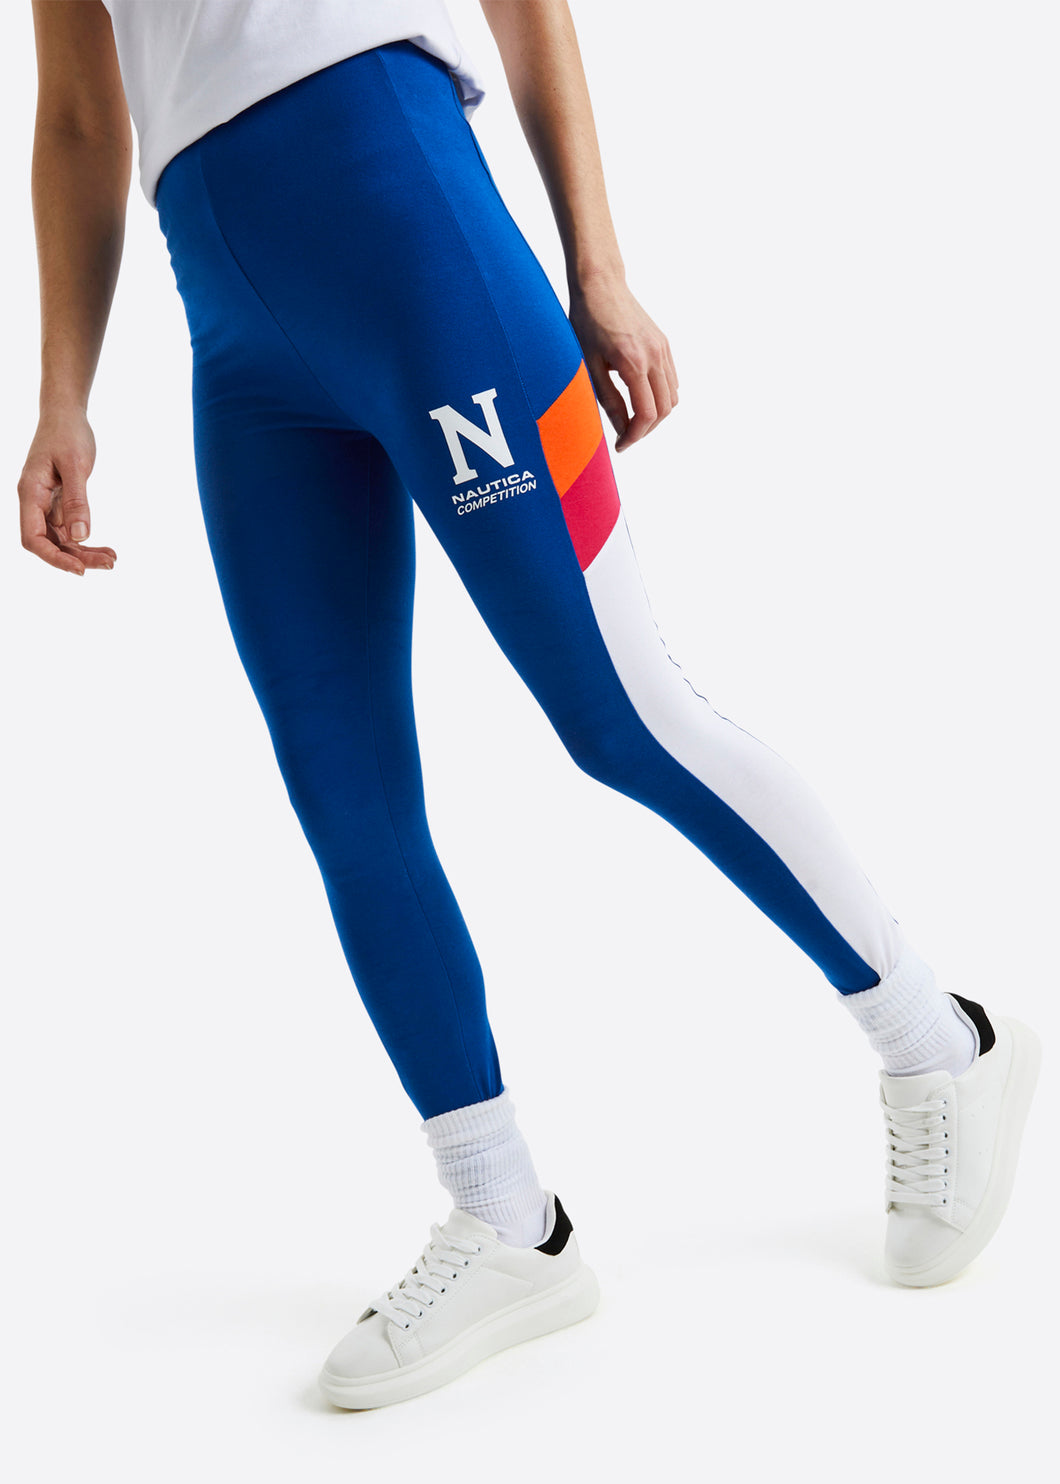 Olympia Navy and White Stripe Mateo Leggings Review - Agent Athletica